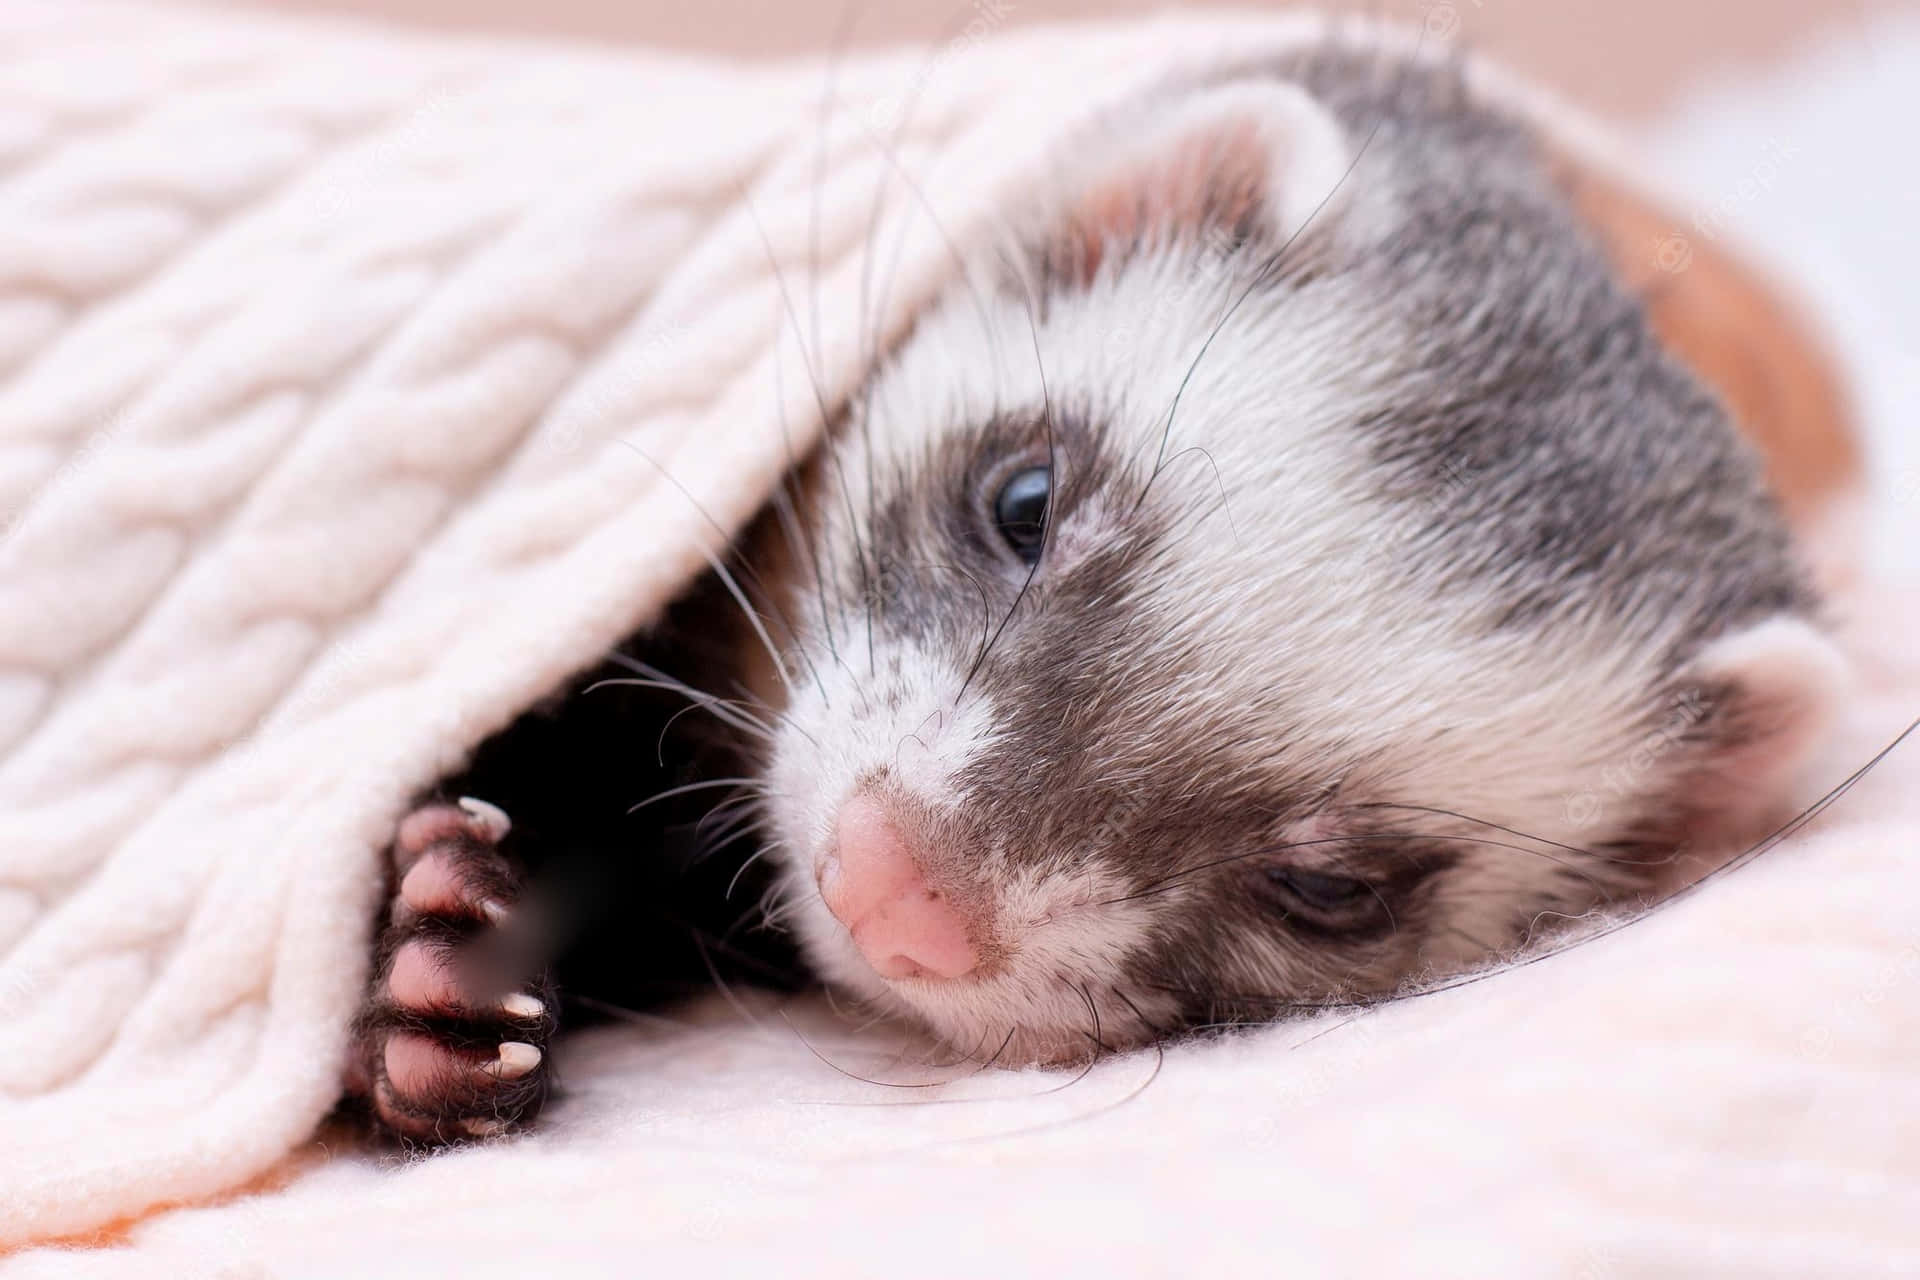 Look into the adorably inquisitive eyes of this fluffy ferret